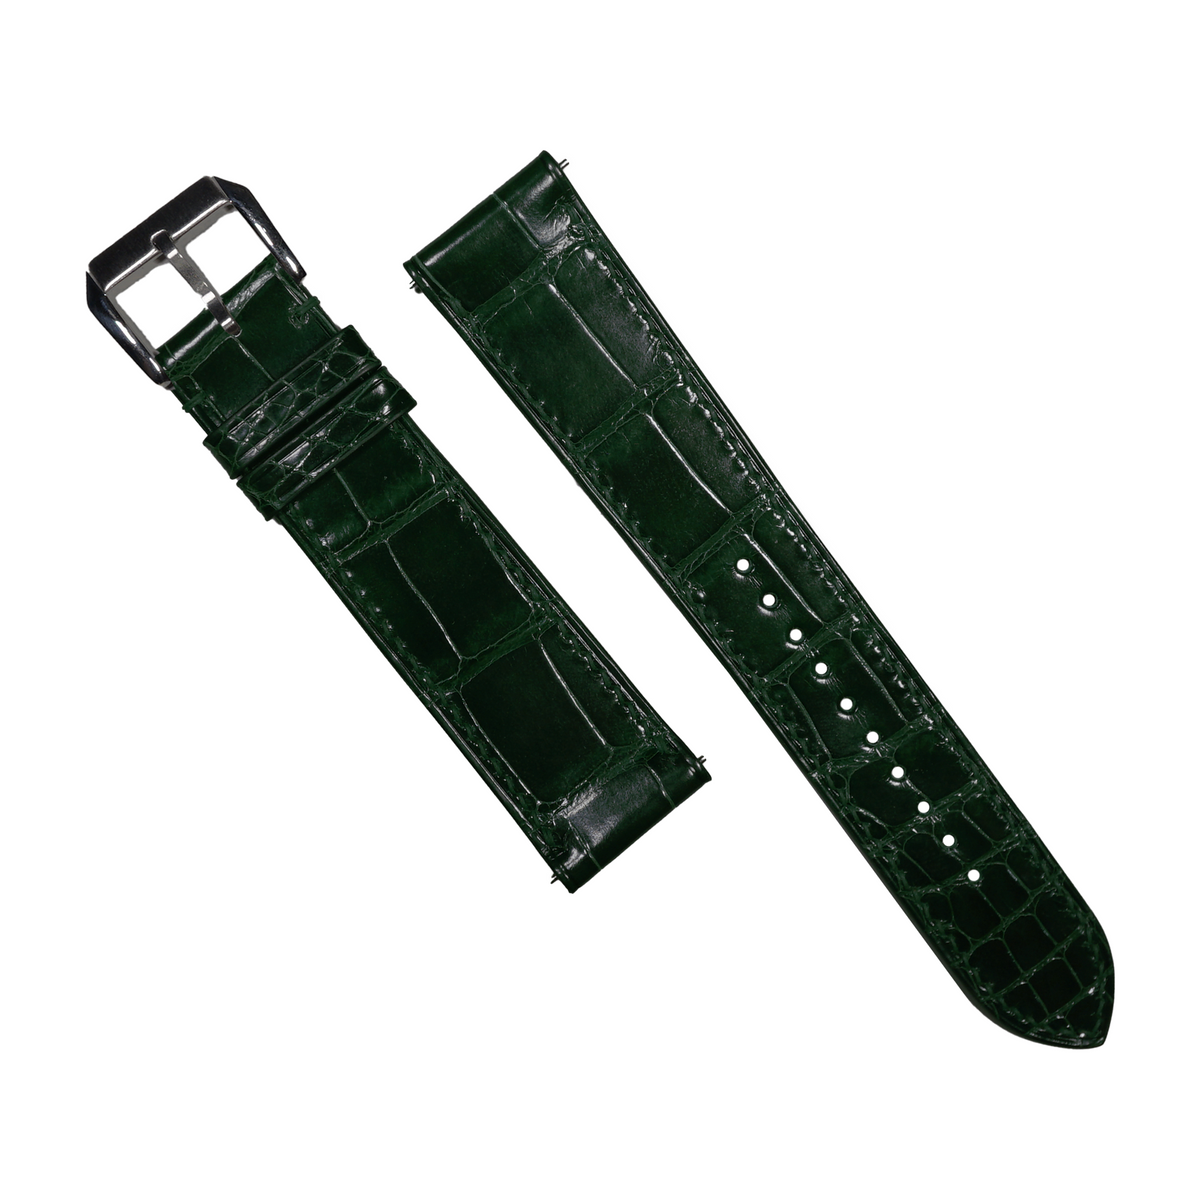 Alligator Leather Watch Strap in Green (Glossy) - Nomad Watch Works MY